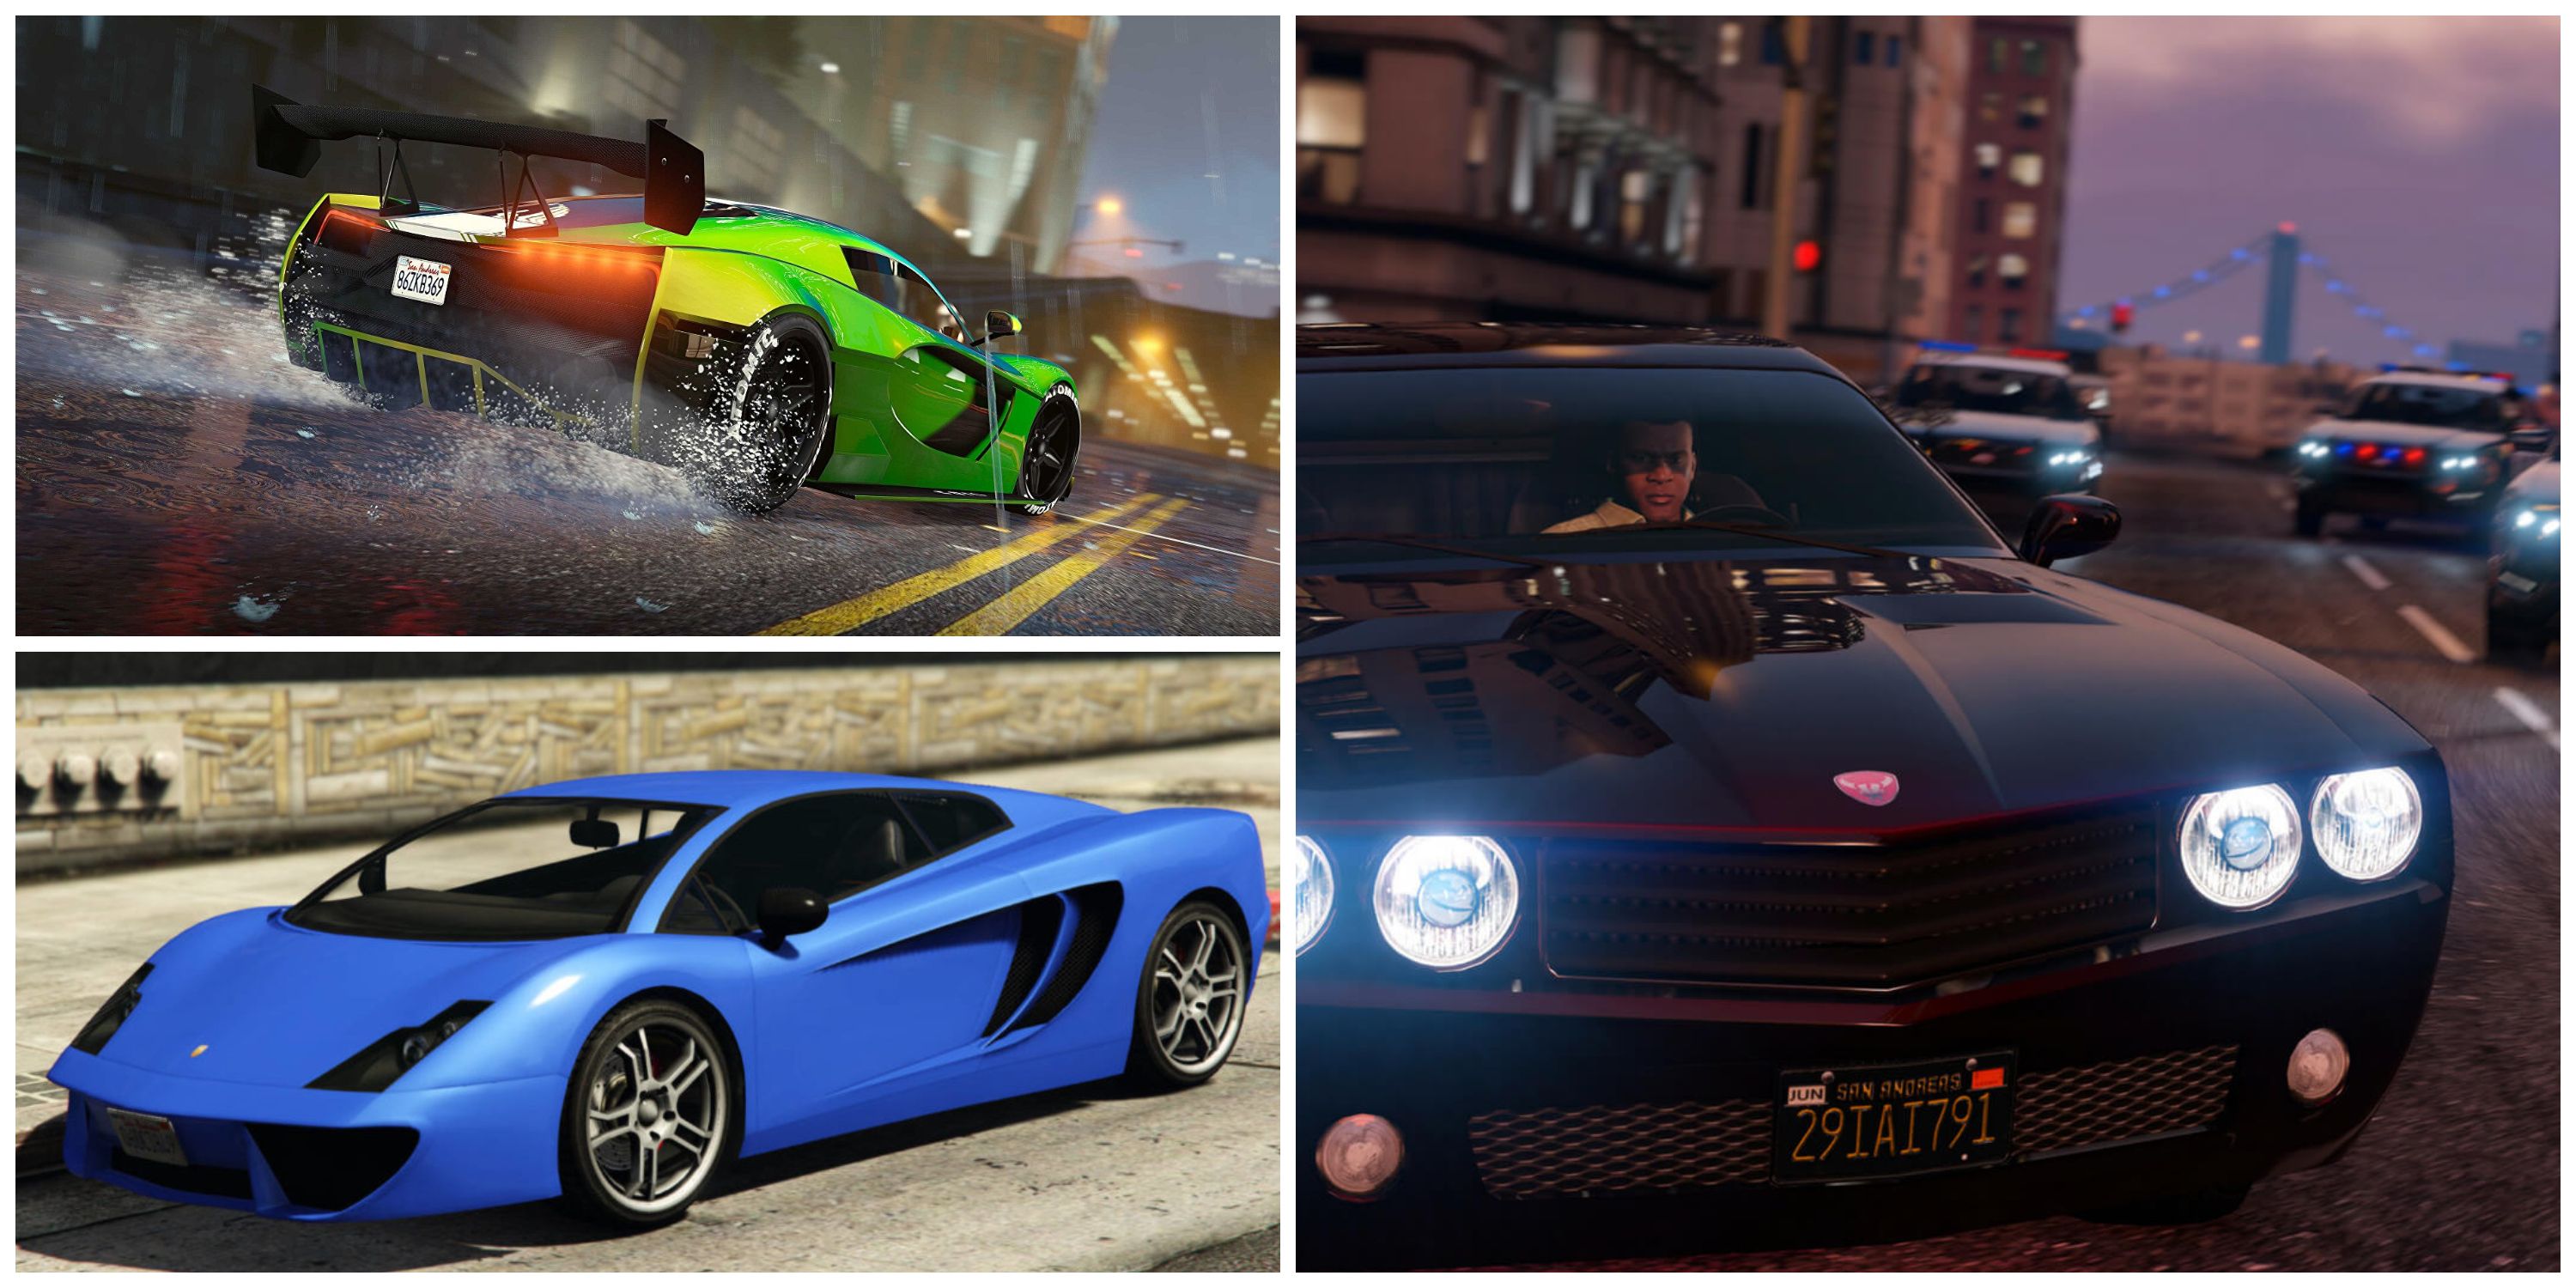 What Is the Fastest Car in 'GTA V' Online?